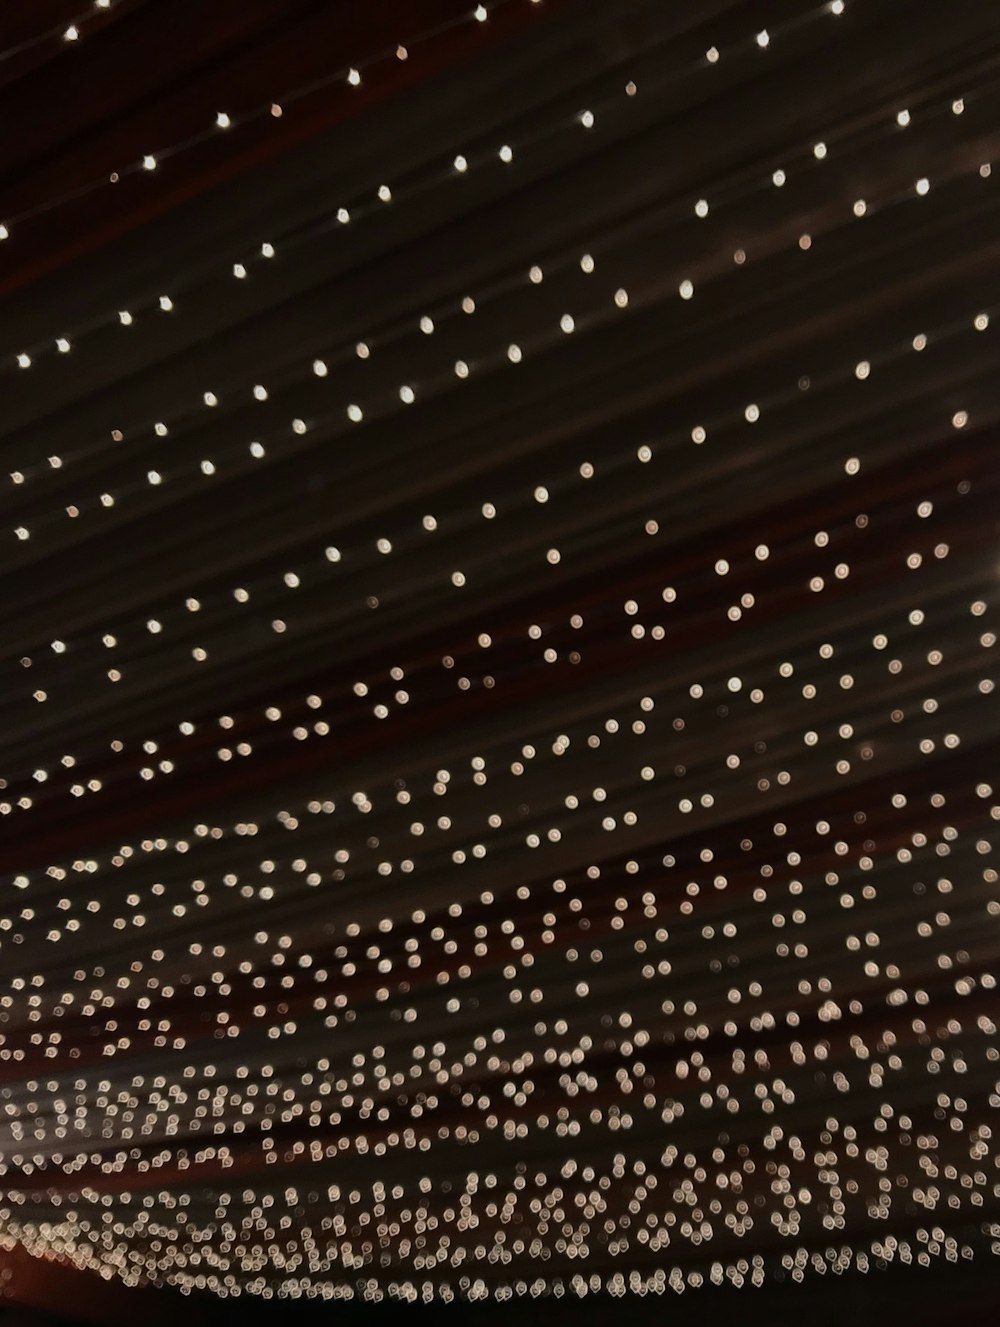 the ceiling of a building with lights on it